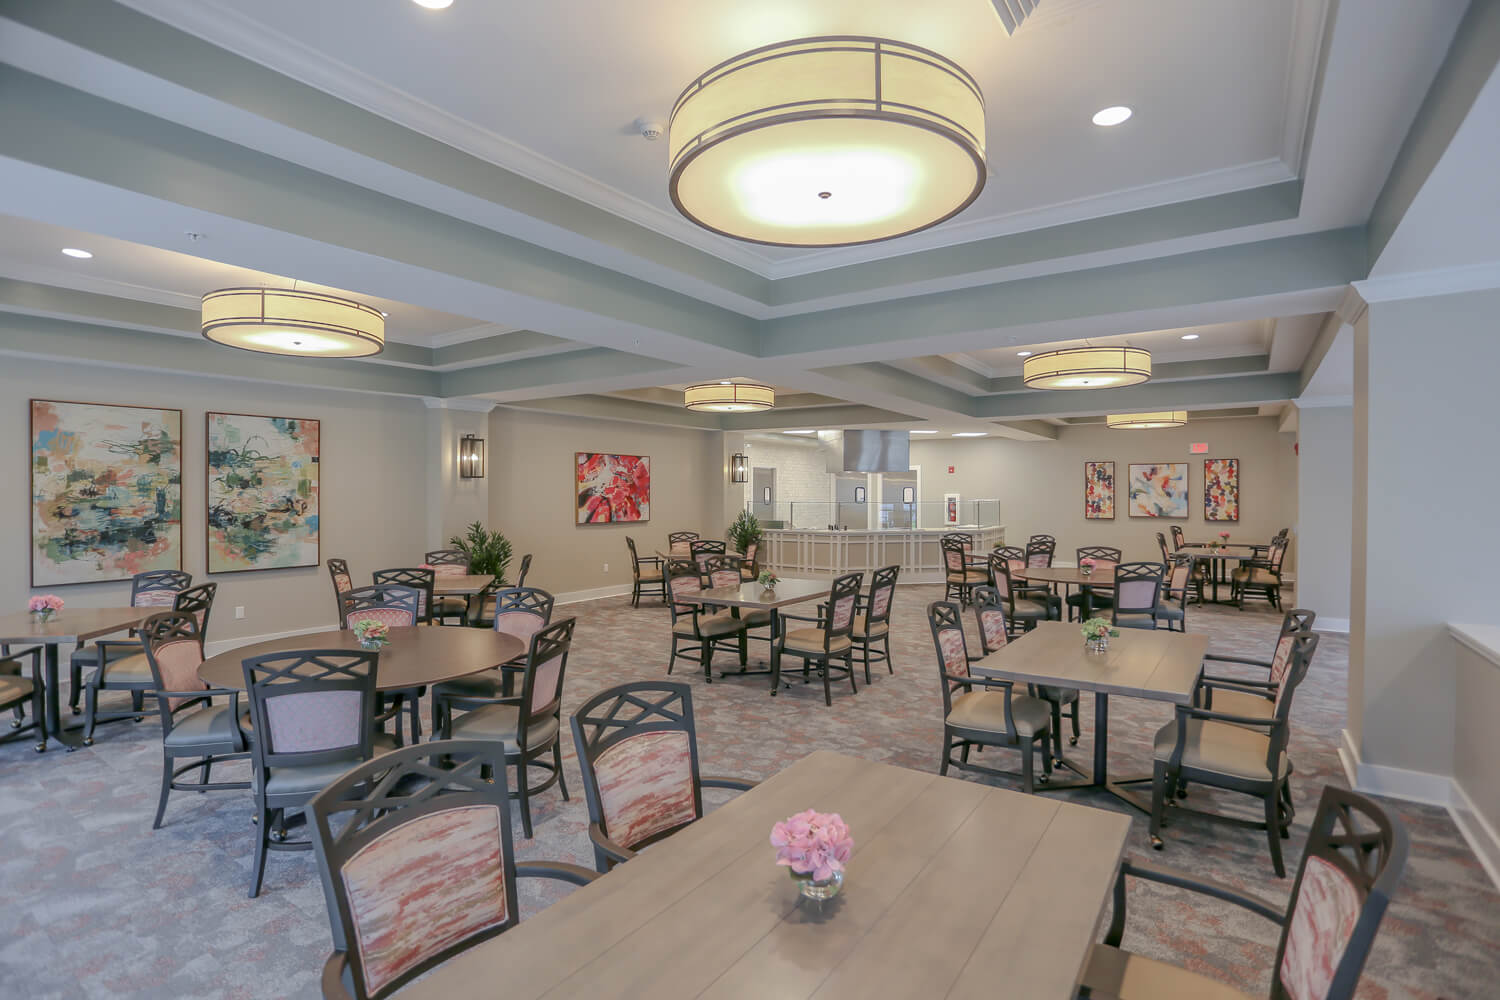 Grand South Senior Living - Dining Room - Designed by Foshee Architecture